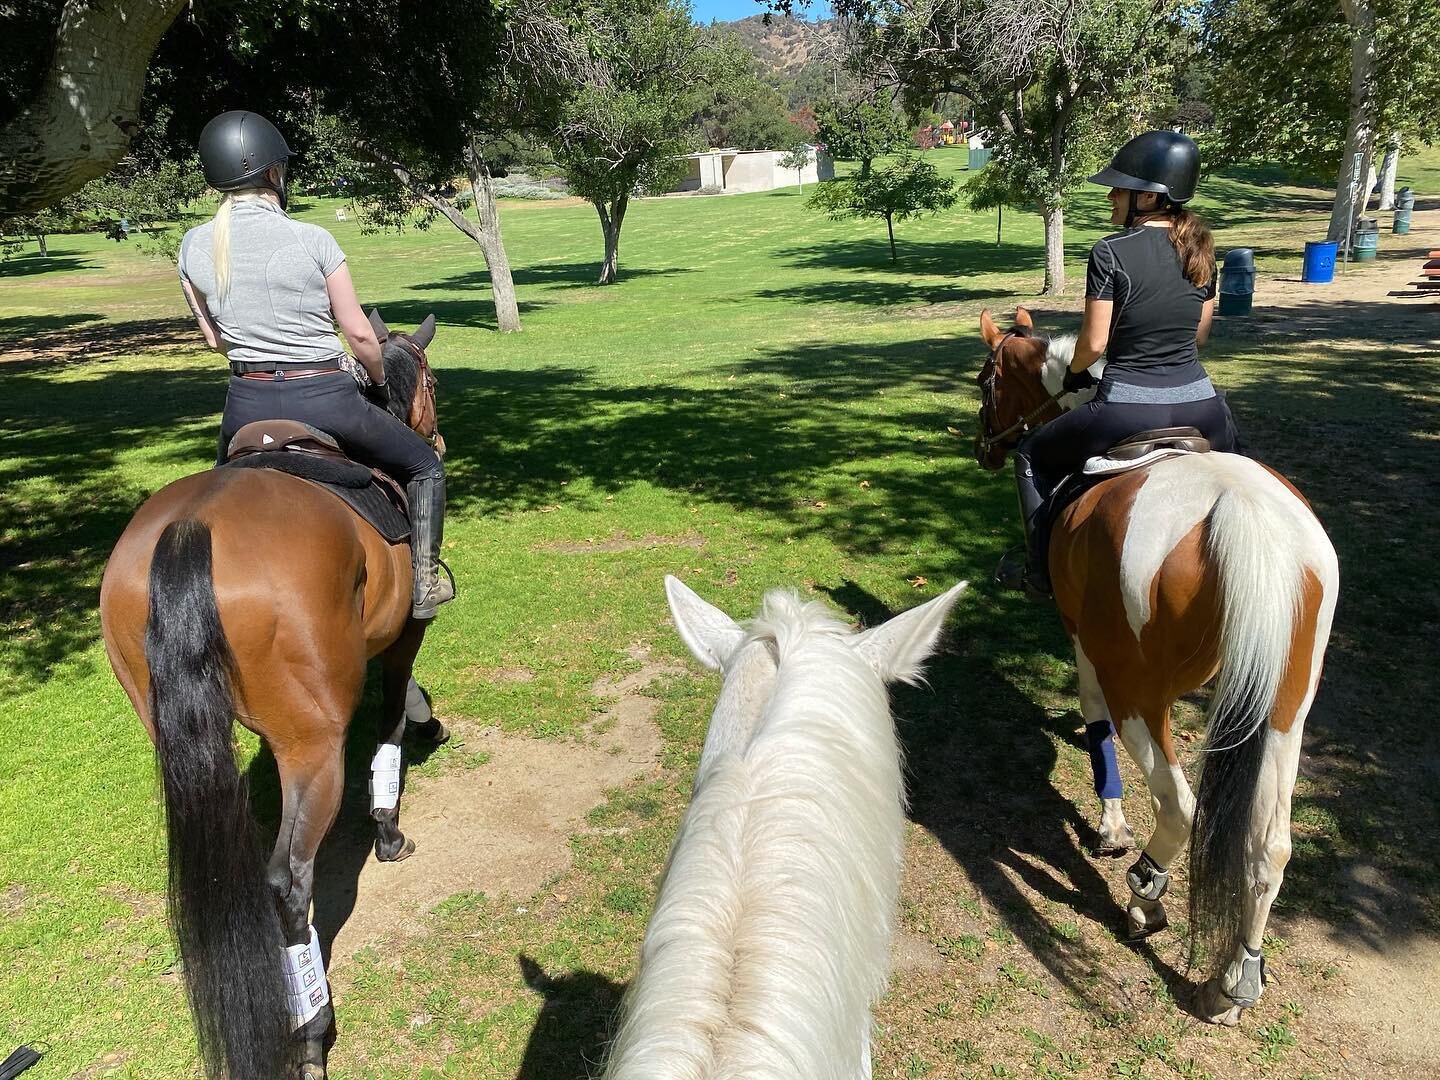 We are back on the trail!! Fortunately many people found solace in Griffith Park during Covid, but due to the commotion (and fear of injury) we decided to take the year off. It feels good to be back and let the horses see all the sights and sounds ou